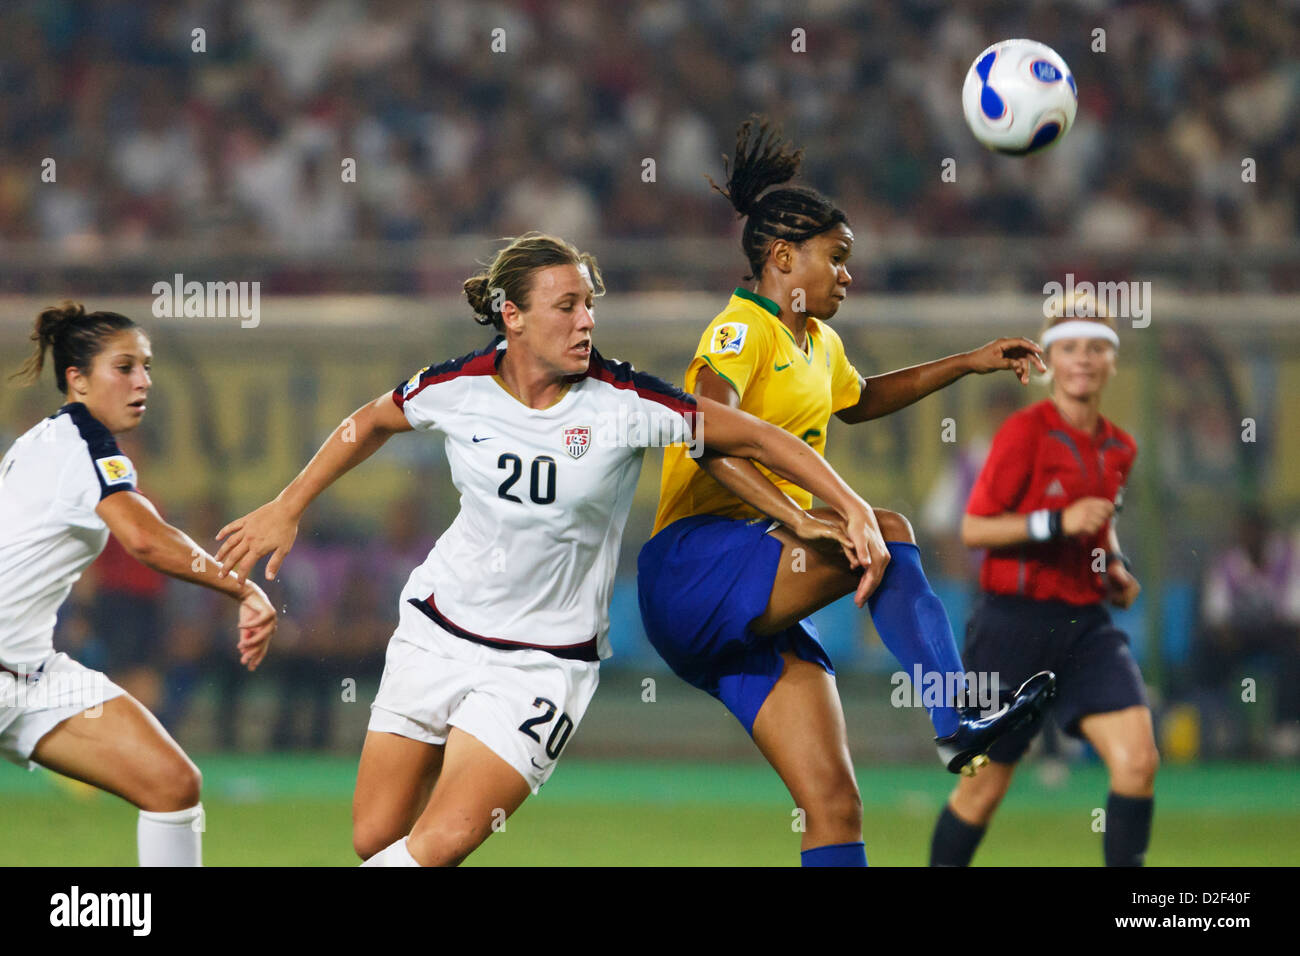 Abby Wambach of the United States (20) battles Renata Costa of Brazil (R) during a  FIFA Women's World Cup semifinal match Stock Photo